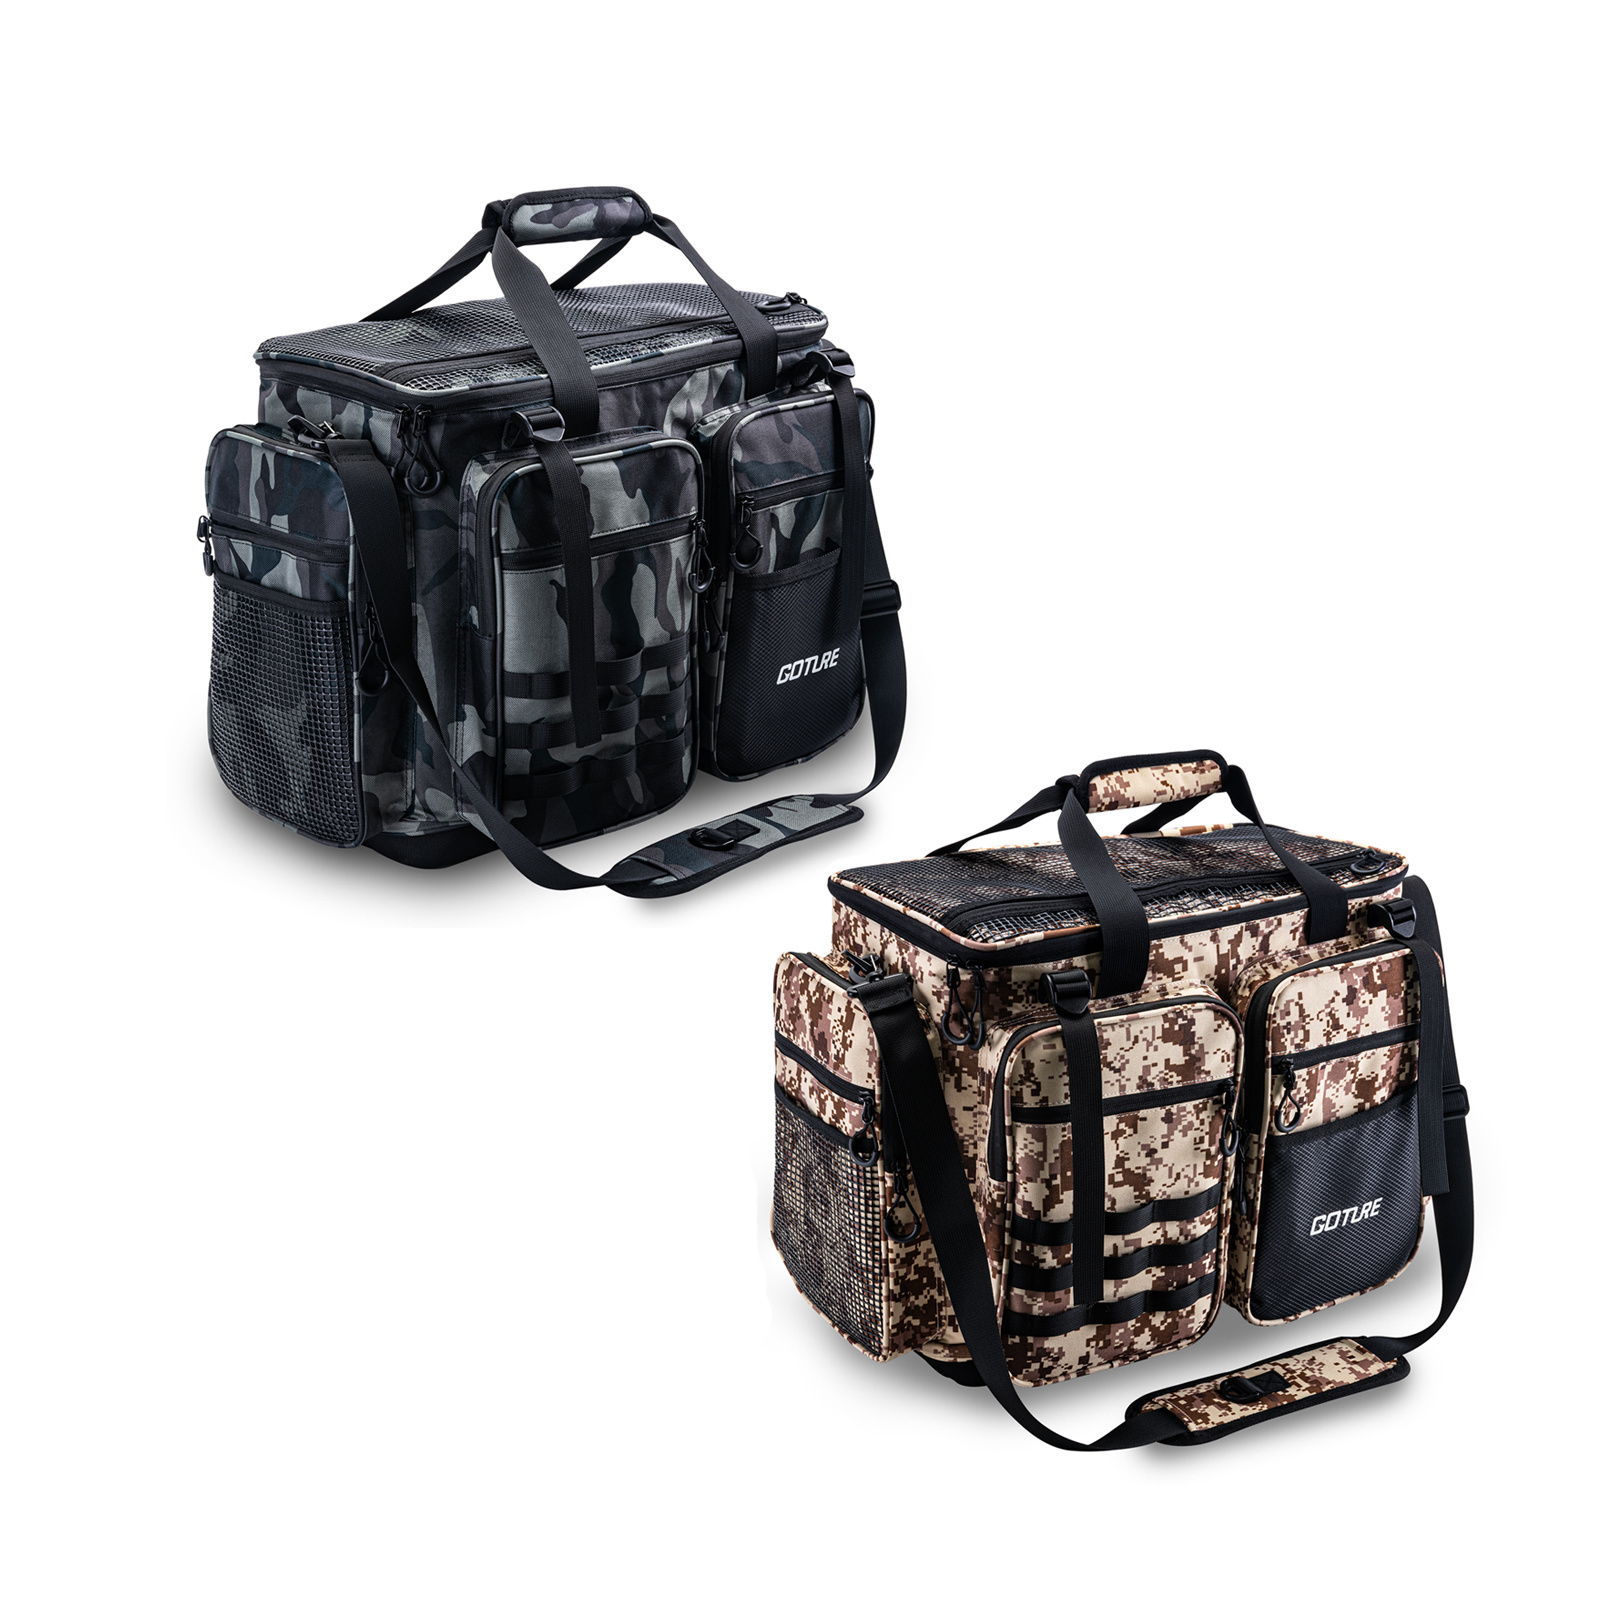 15L Saltwater Fishing Tackle Box Black Gear Bag For Freight Free Ice Fishing  Gear Bag From Xuan09, $24.56